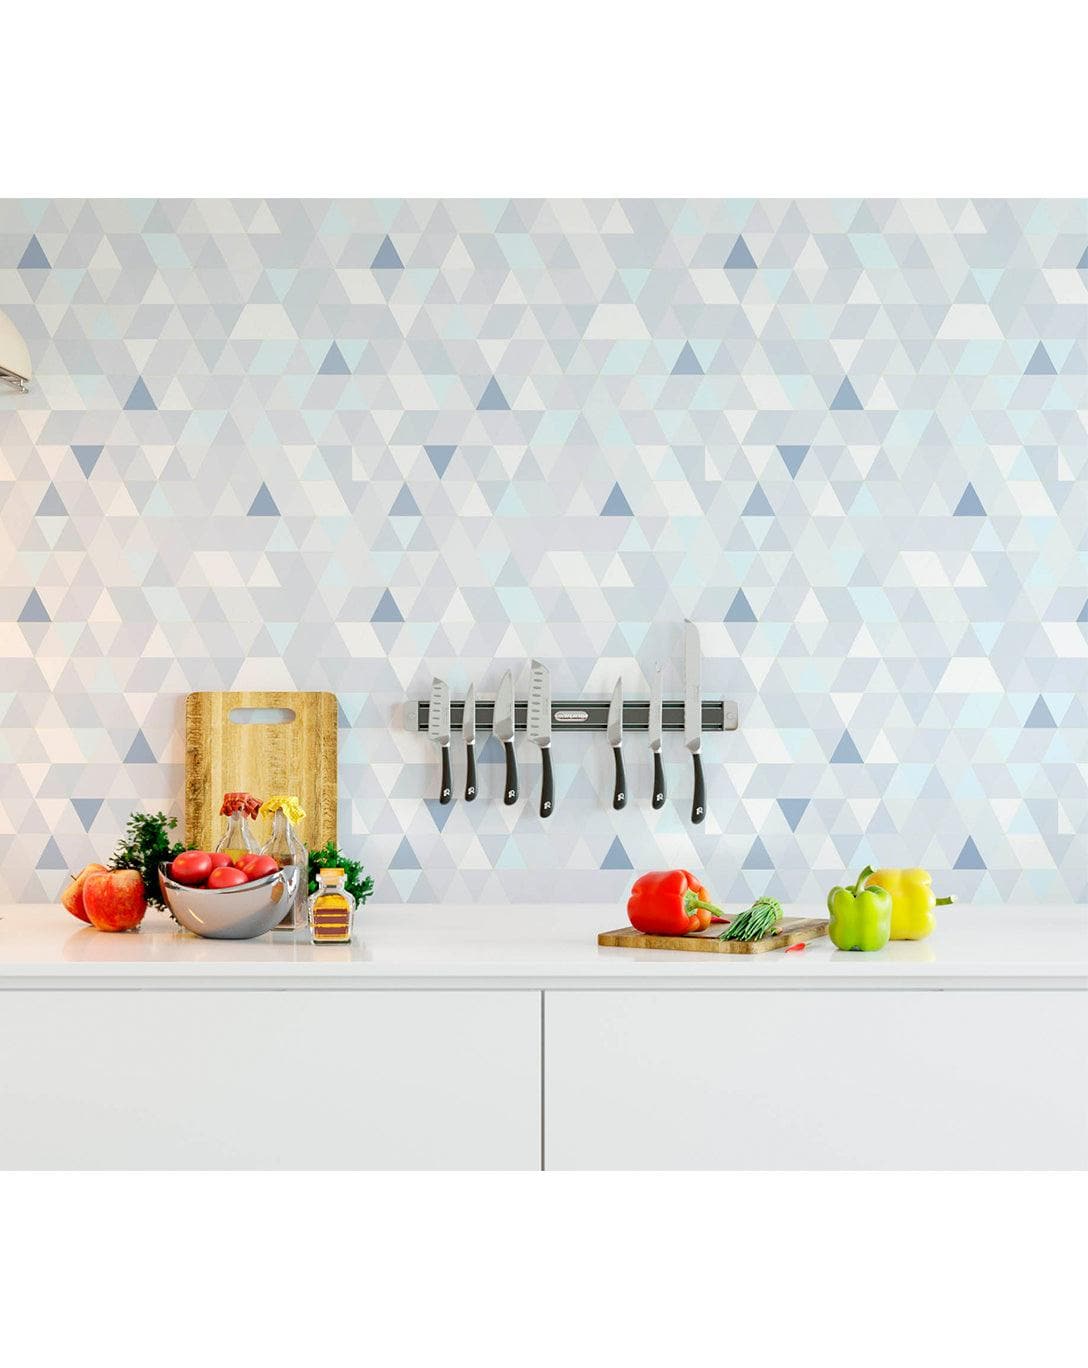 Geometric Blue and White Triangle Removable Wallpaper Geometric Blue and White Triangle Removable Wallpaper 